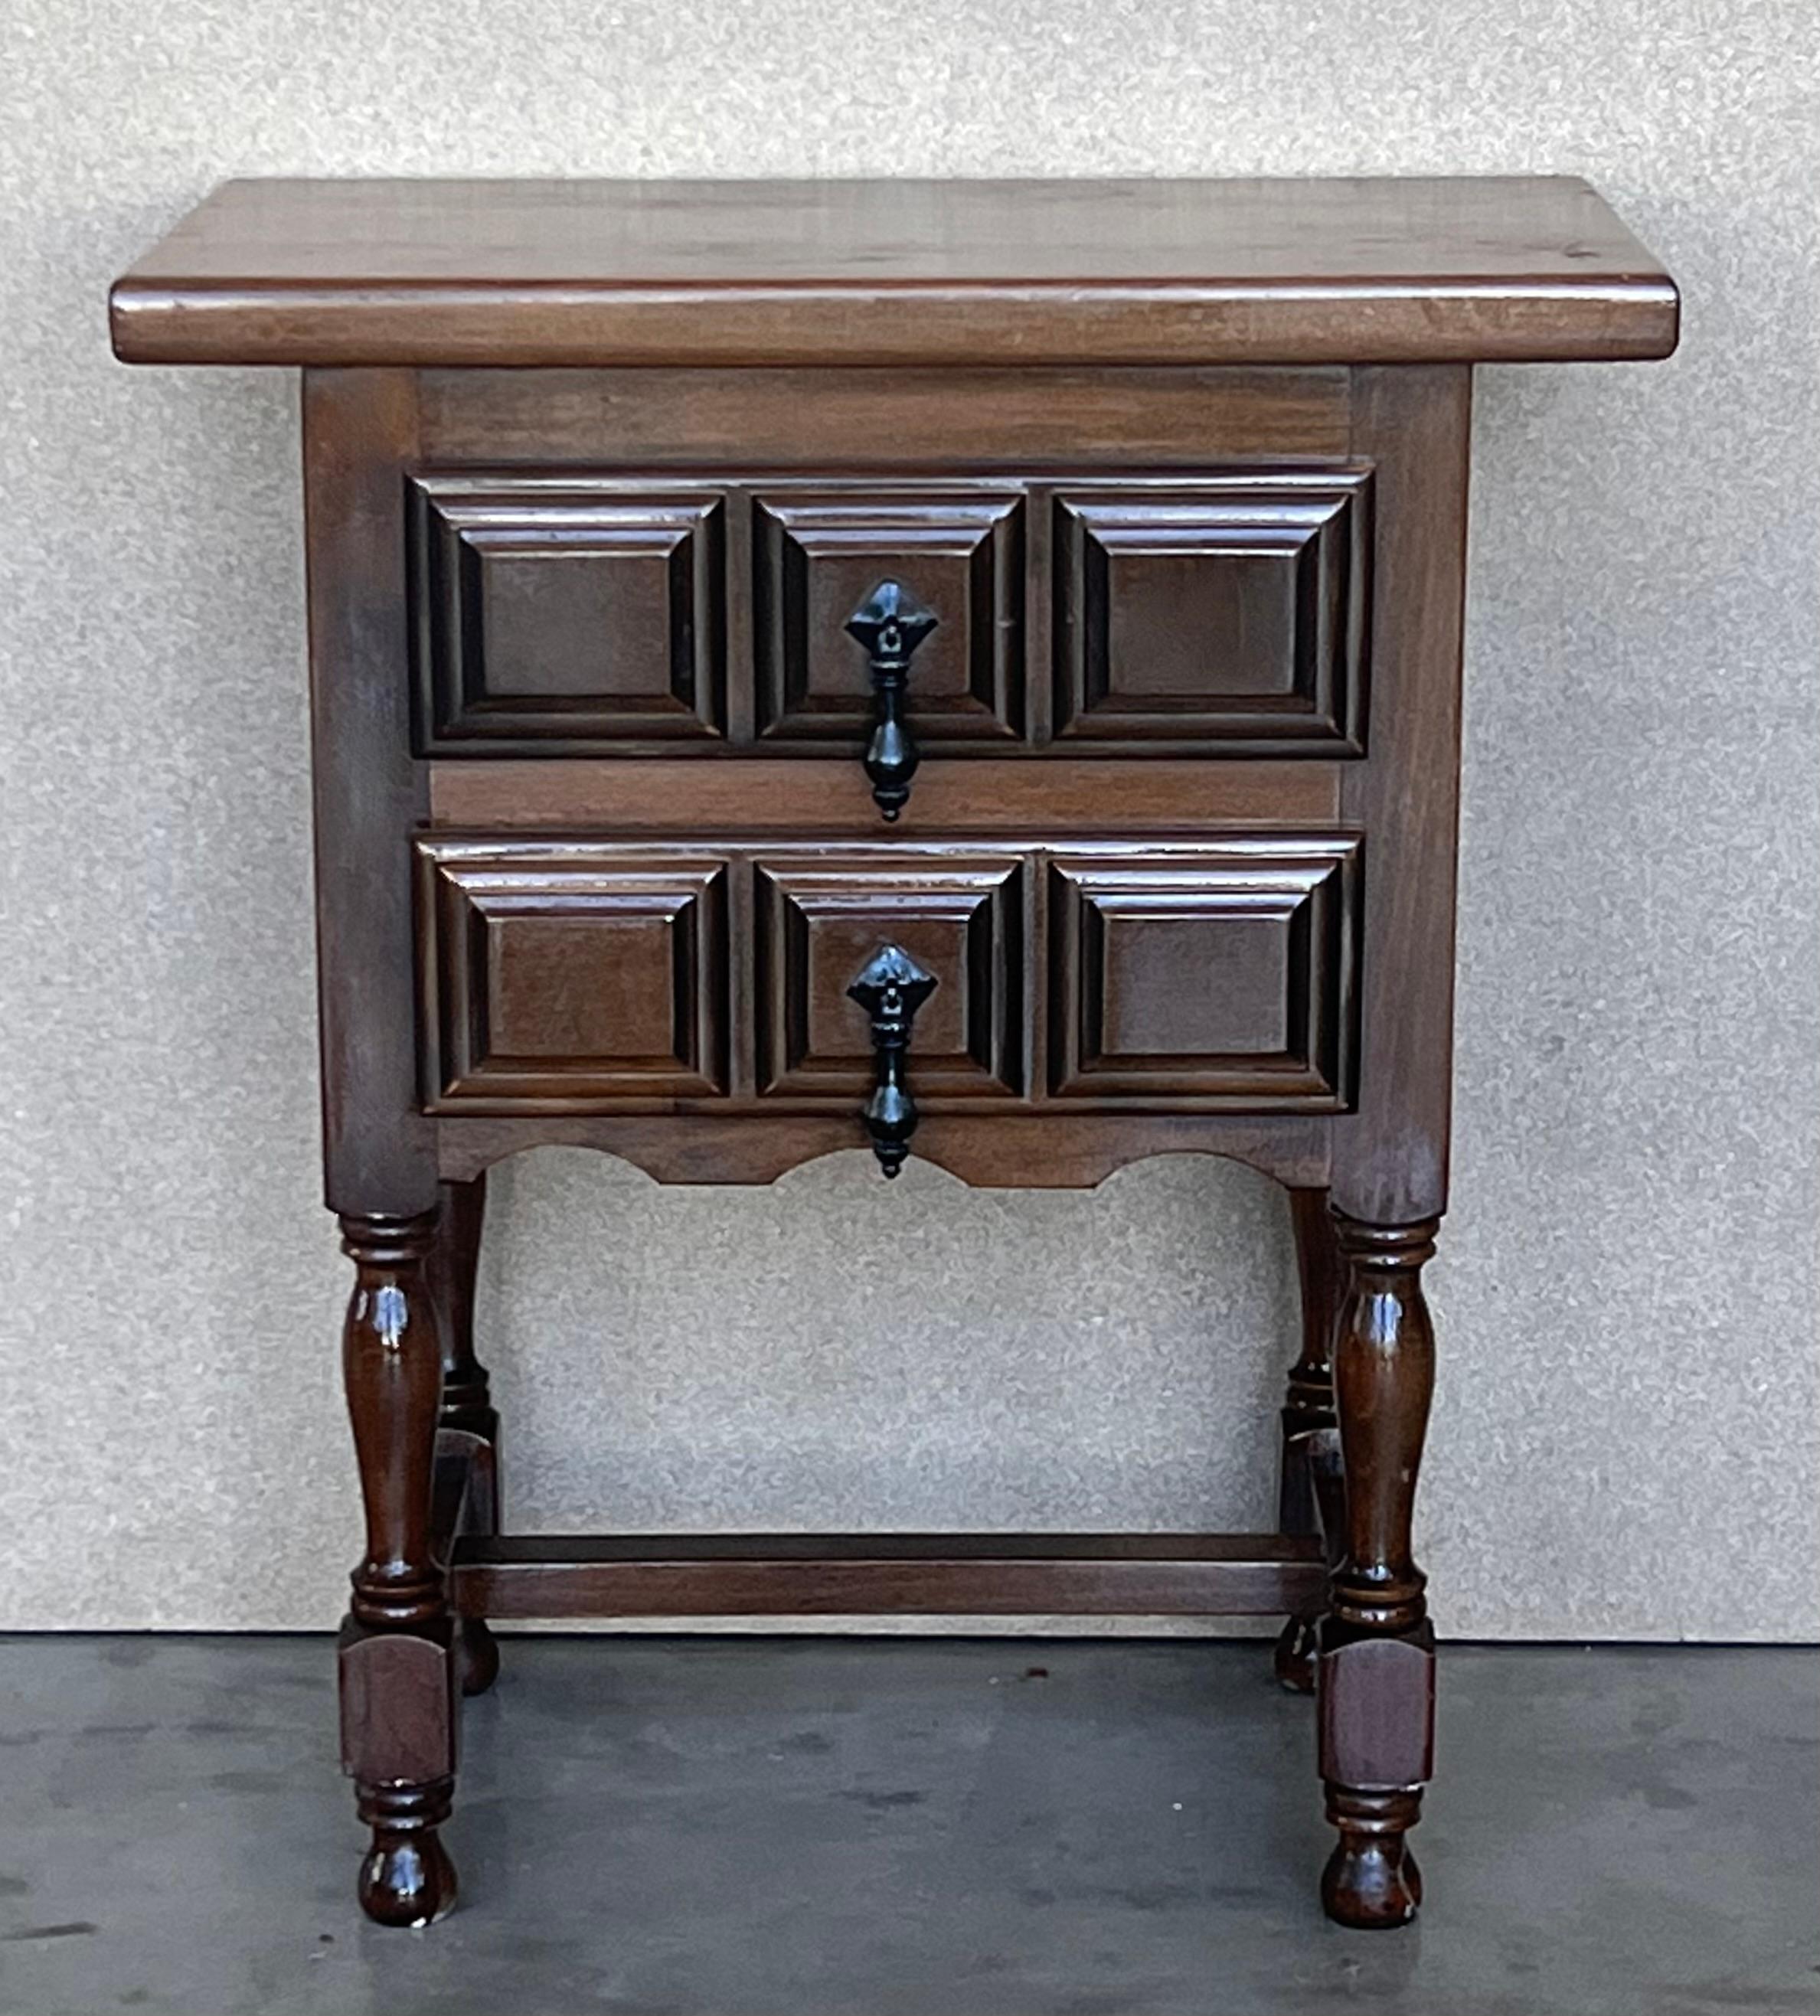 Spanish Colonial 20th Century Pair of Spanish Nightstands with Two Drawers and Iron Hardware